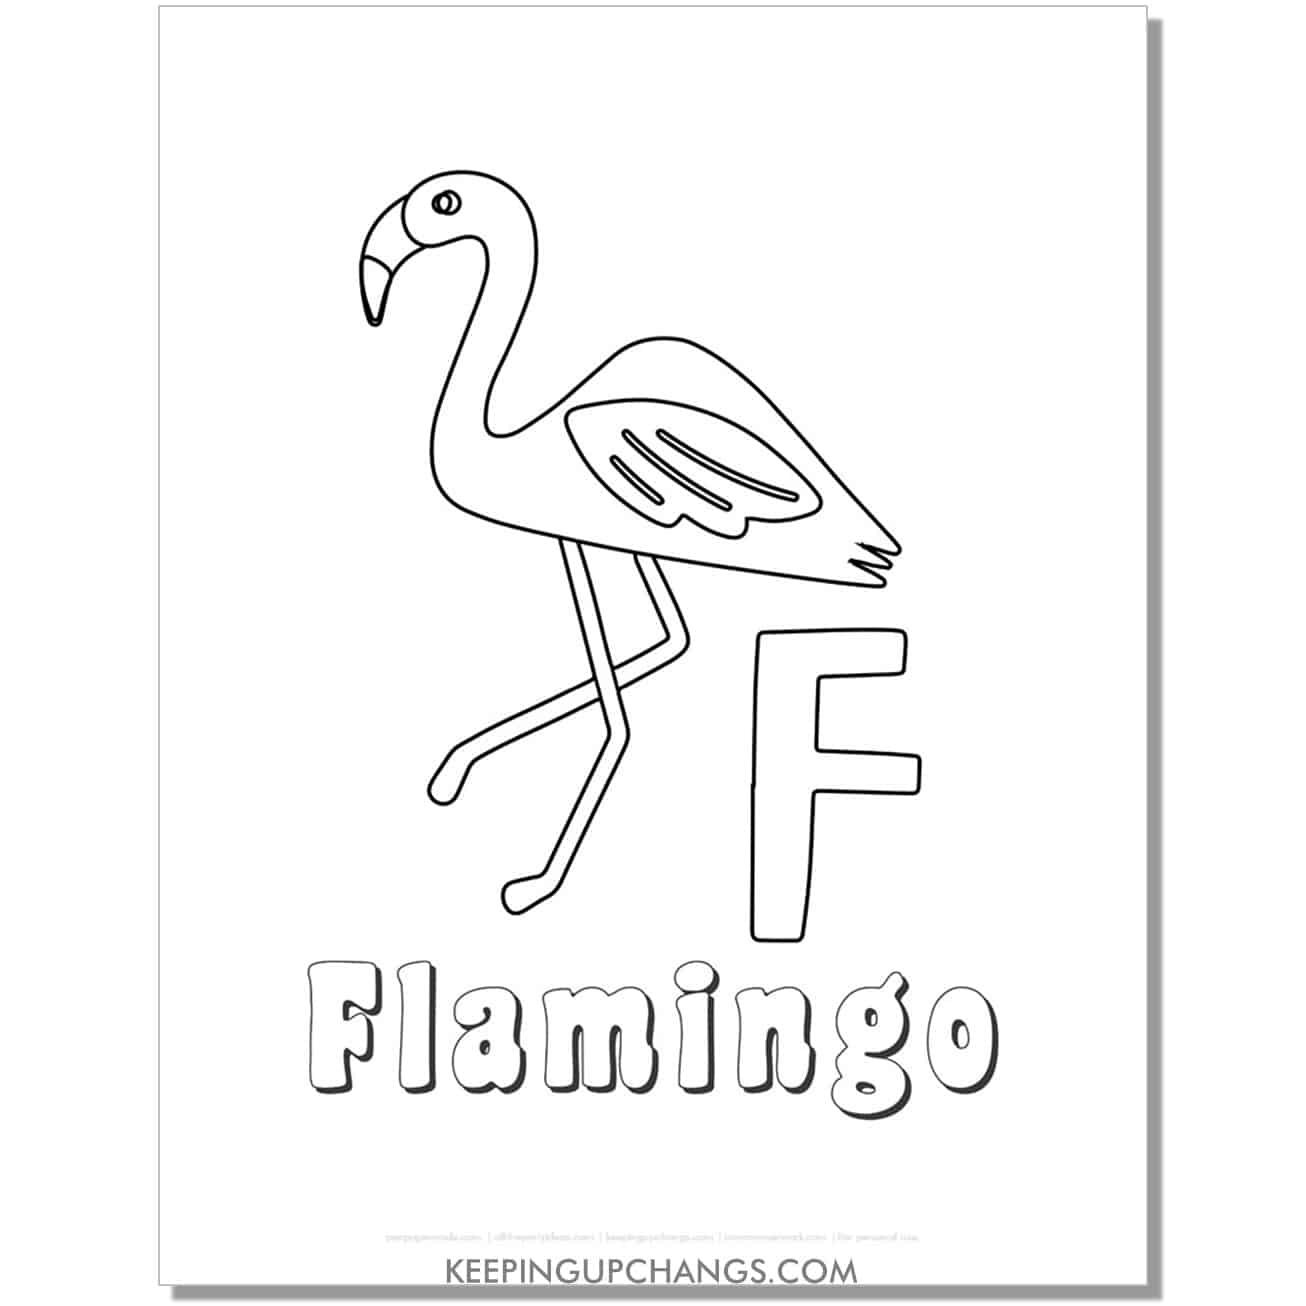 fun abc f coloring page with flamingo hand drawing.